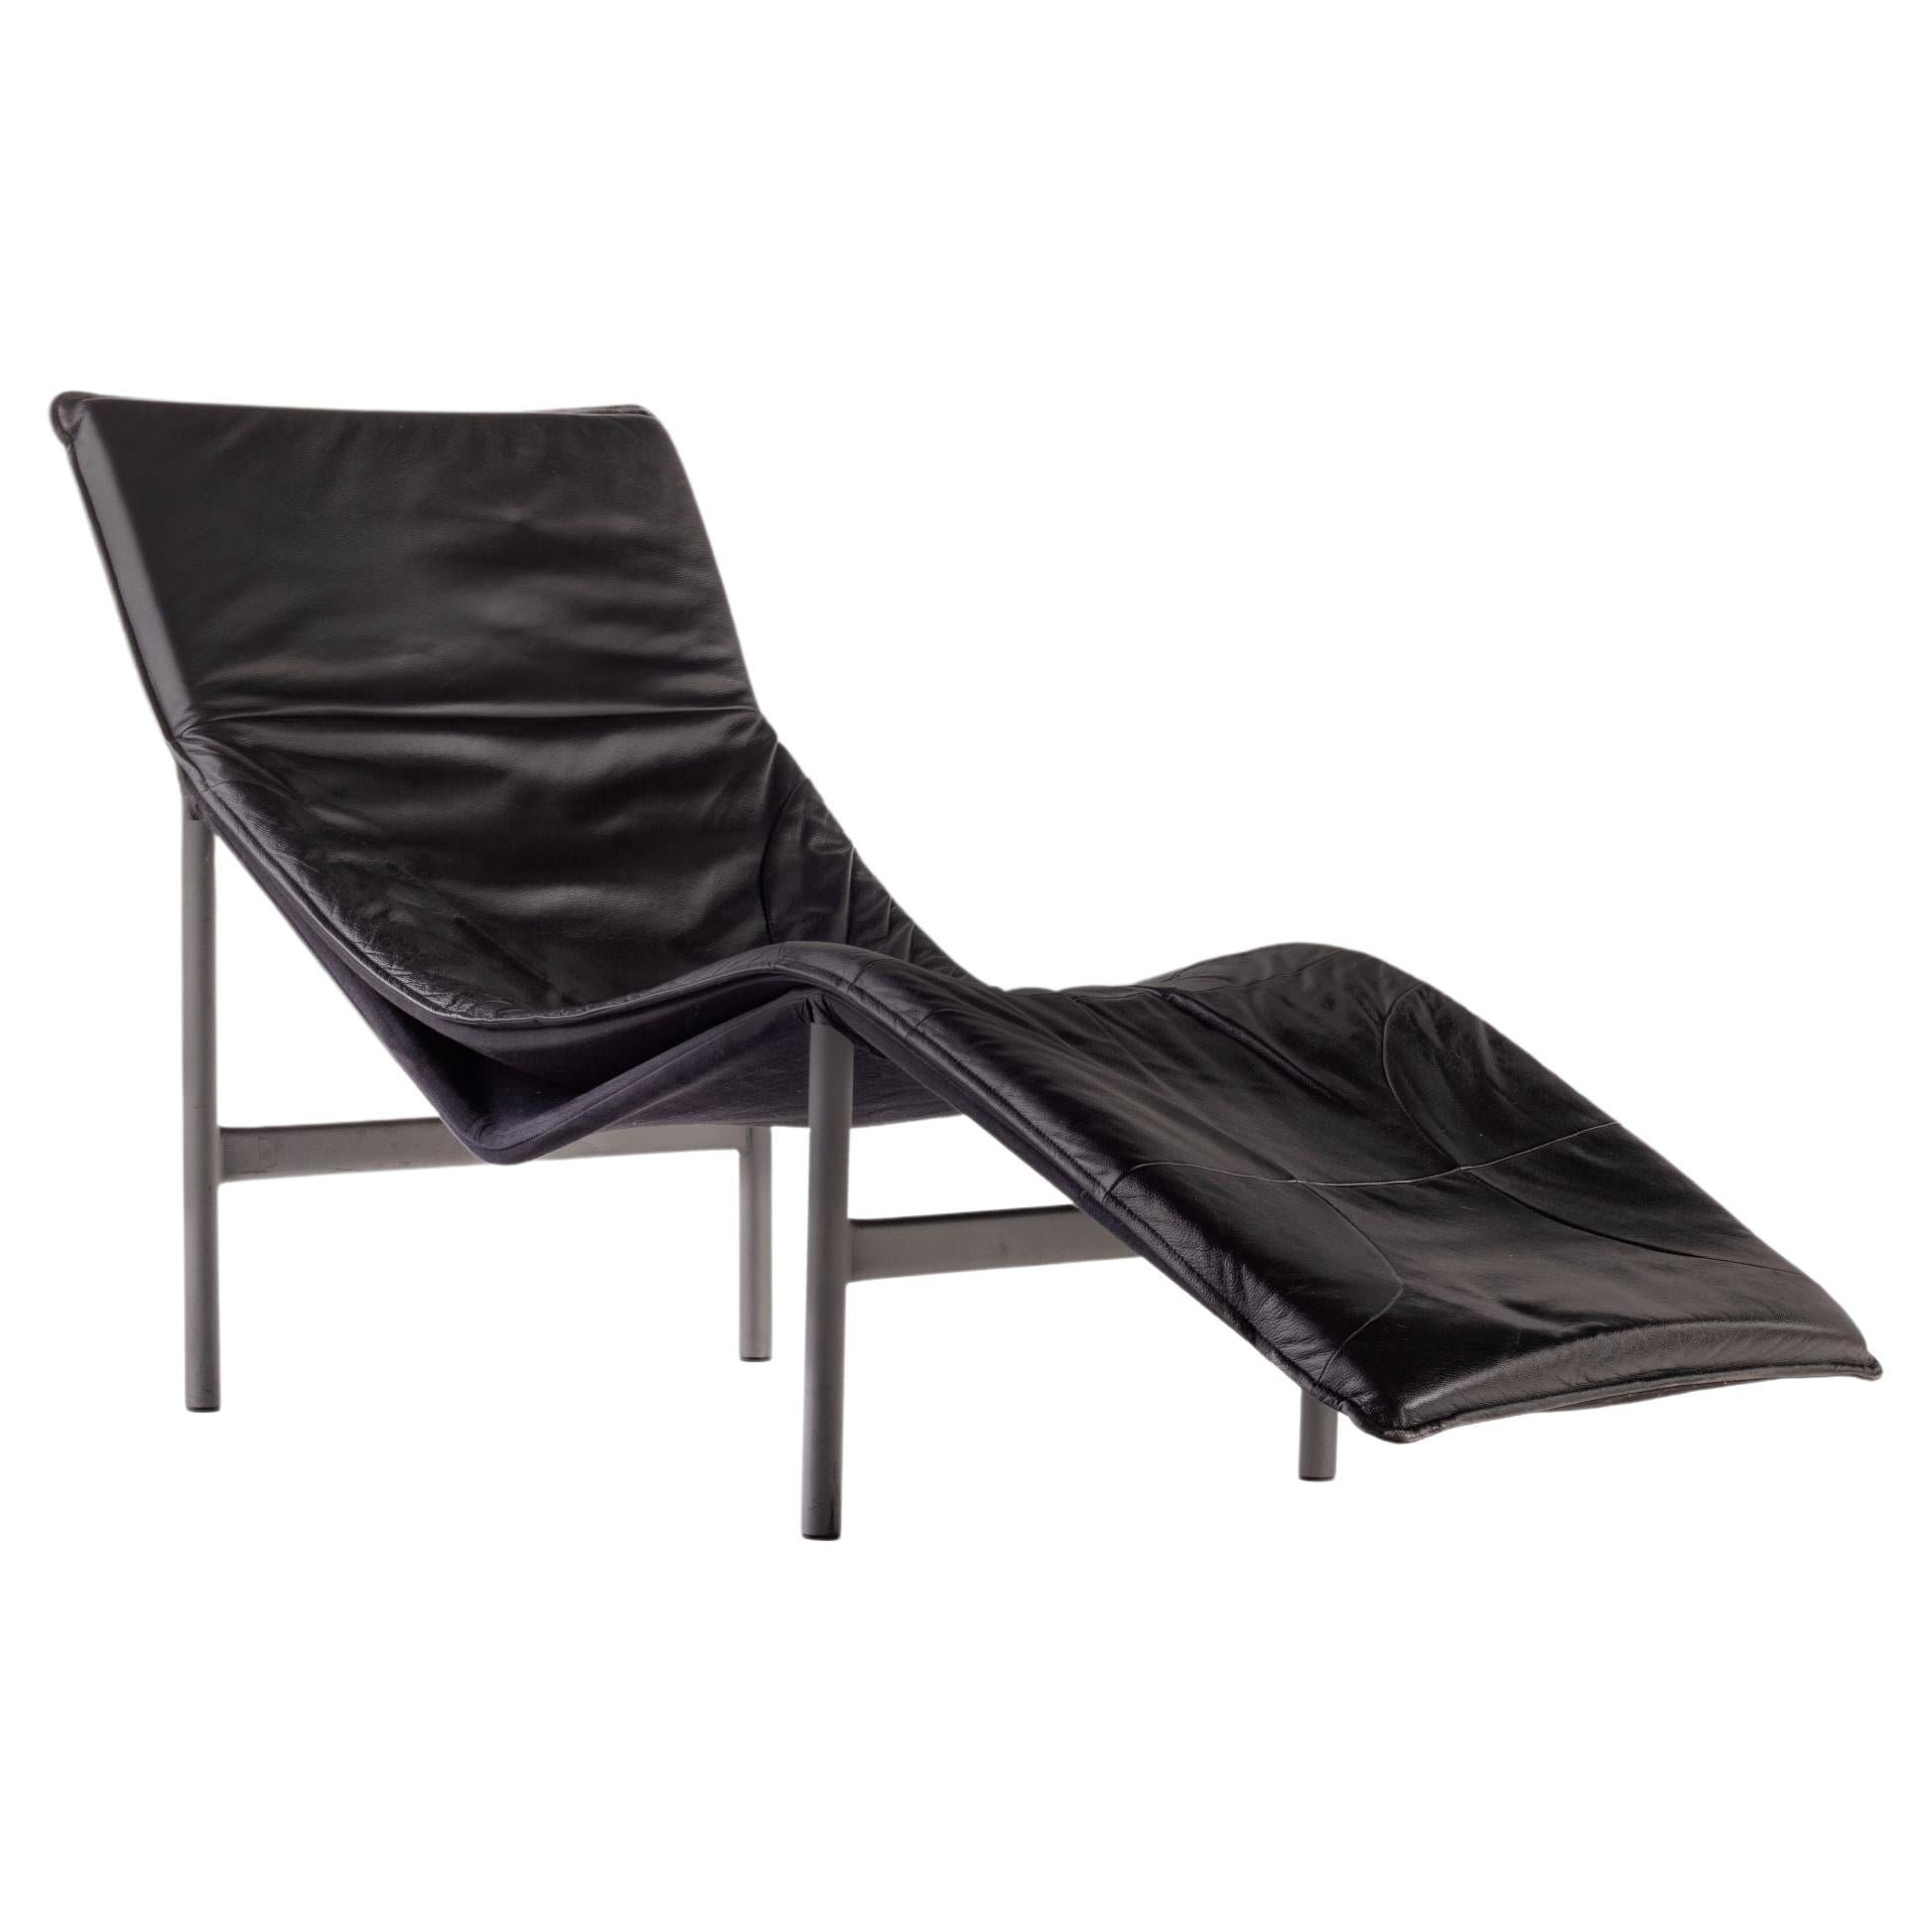 Modern "Skye" Leather Chaise Lounge Chair by Tord Björklund, Sweden, c. 1970's For Sale